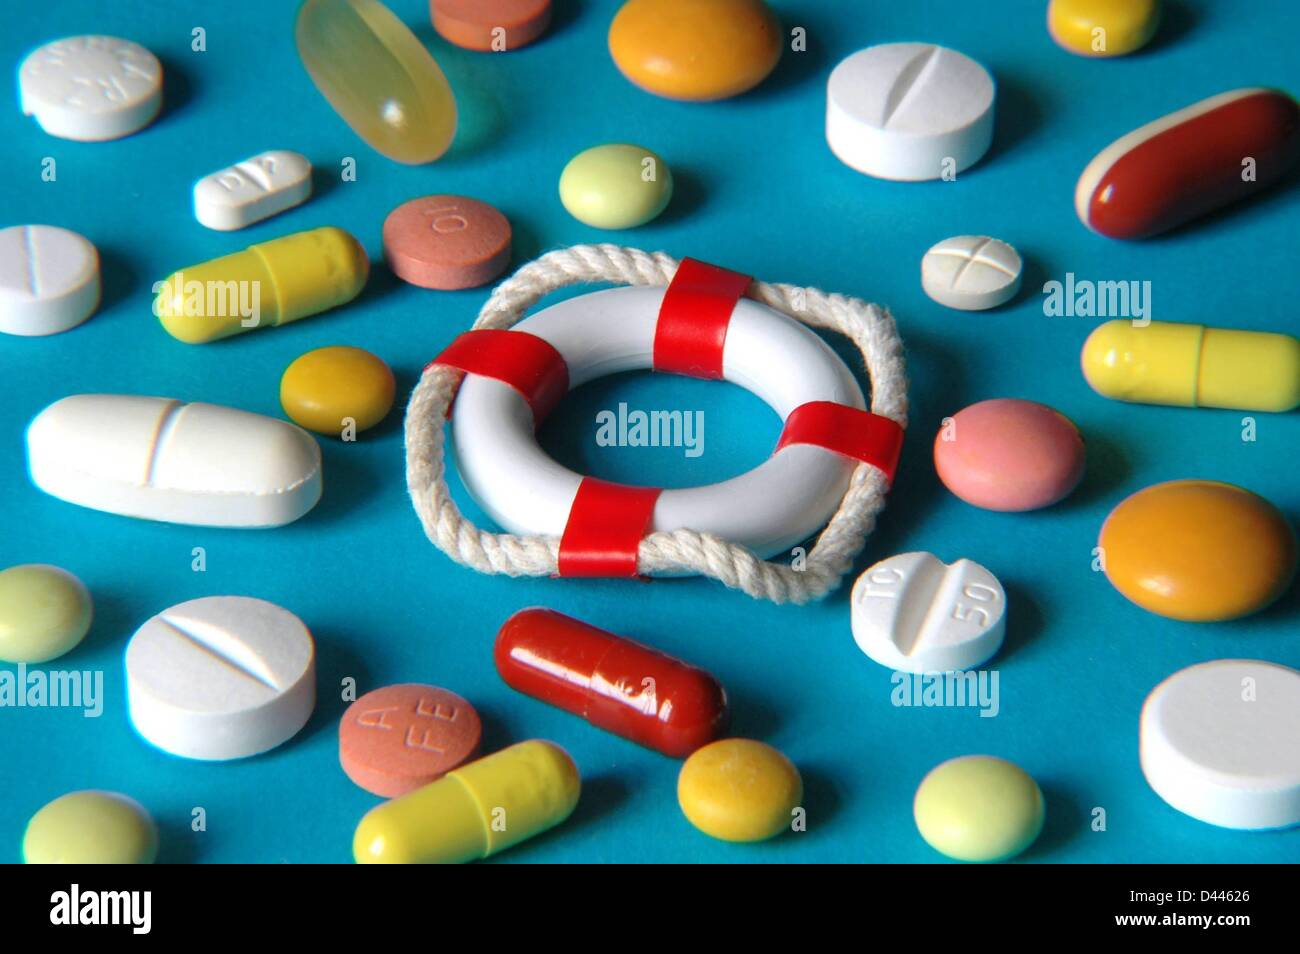 Illustration - Various colorful tablets and capsules are spread around a miniature safety buoy, in Berlin, Germany, 25 December 2007. Fotoarchiv für ZeitgeschichteS.Steinach Stock Photo